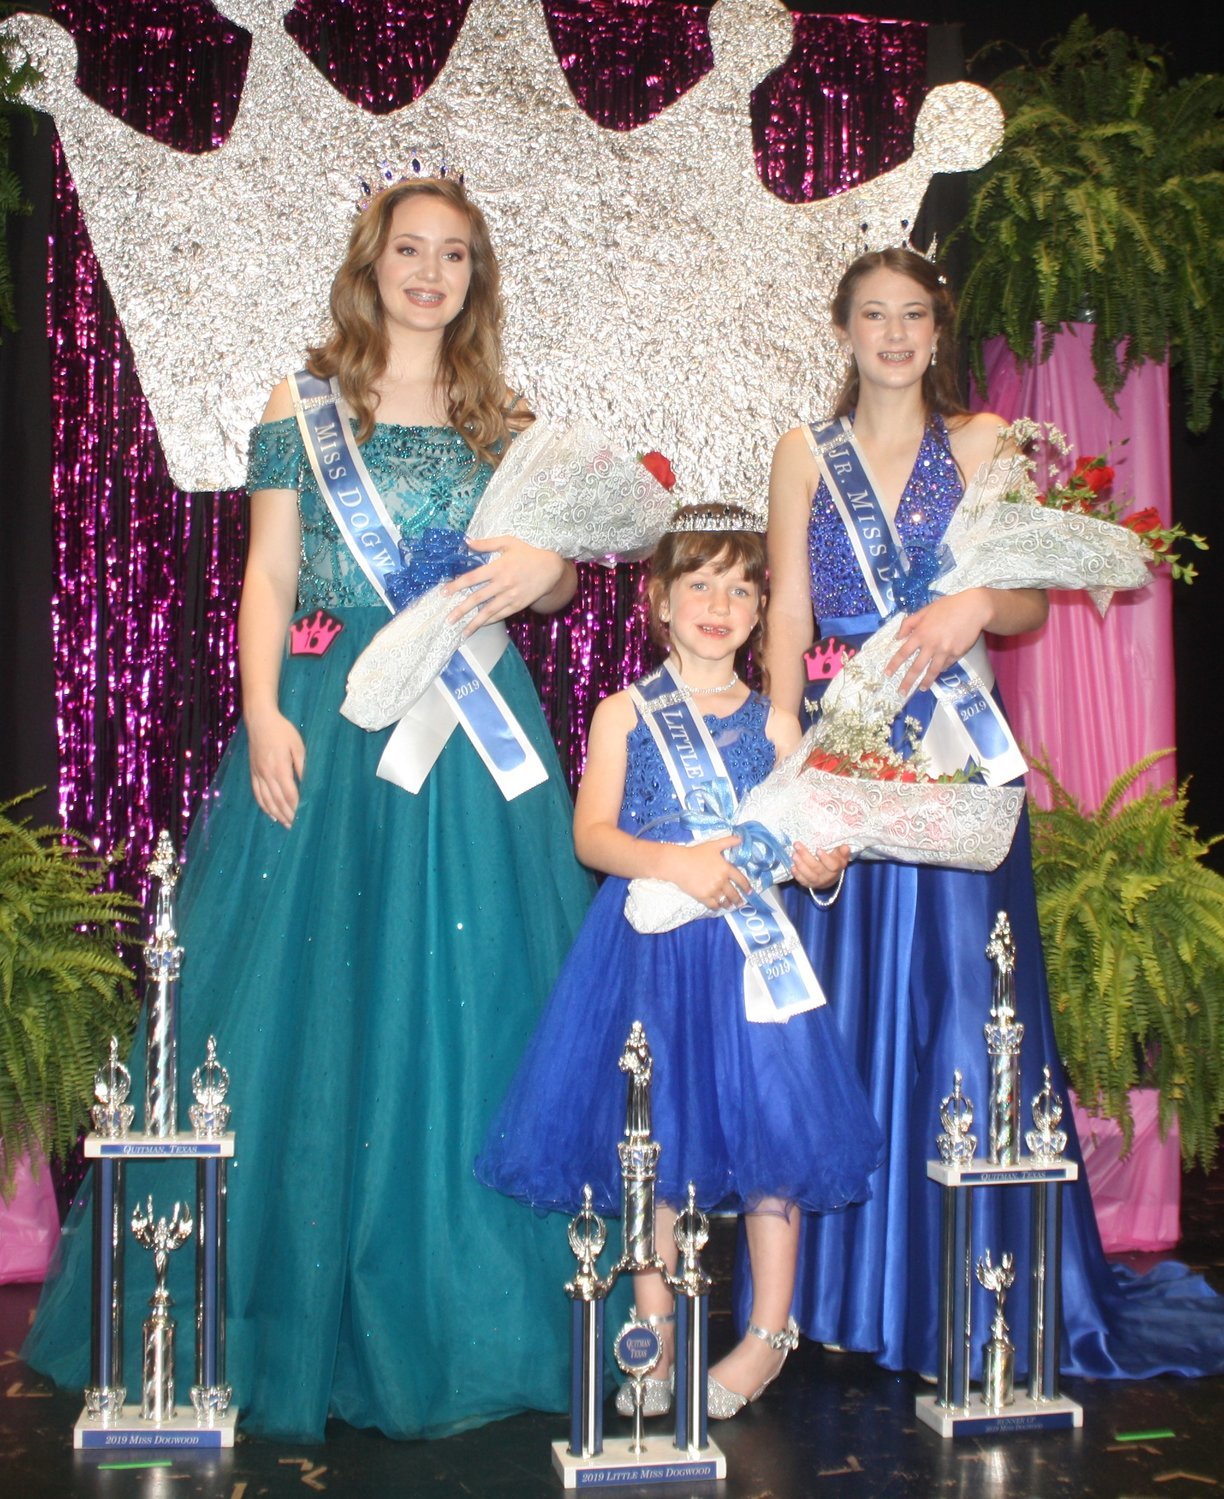 The 2019 Dogwood Queens together on stage with their flowers and trophies. Miss Dogwood Lucy Brannon (left) Little Miss Dogwood Karley Kernes (middle) and Junior Miss Dogwood Kameran Farnham.